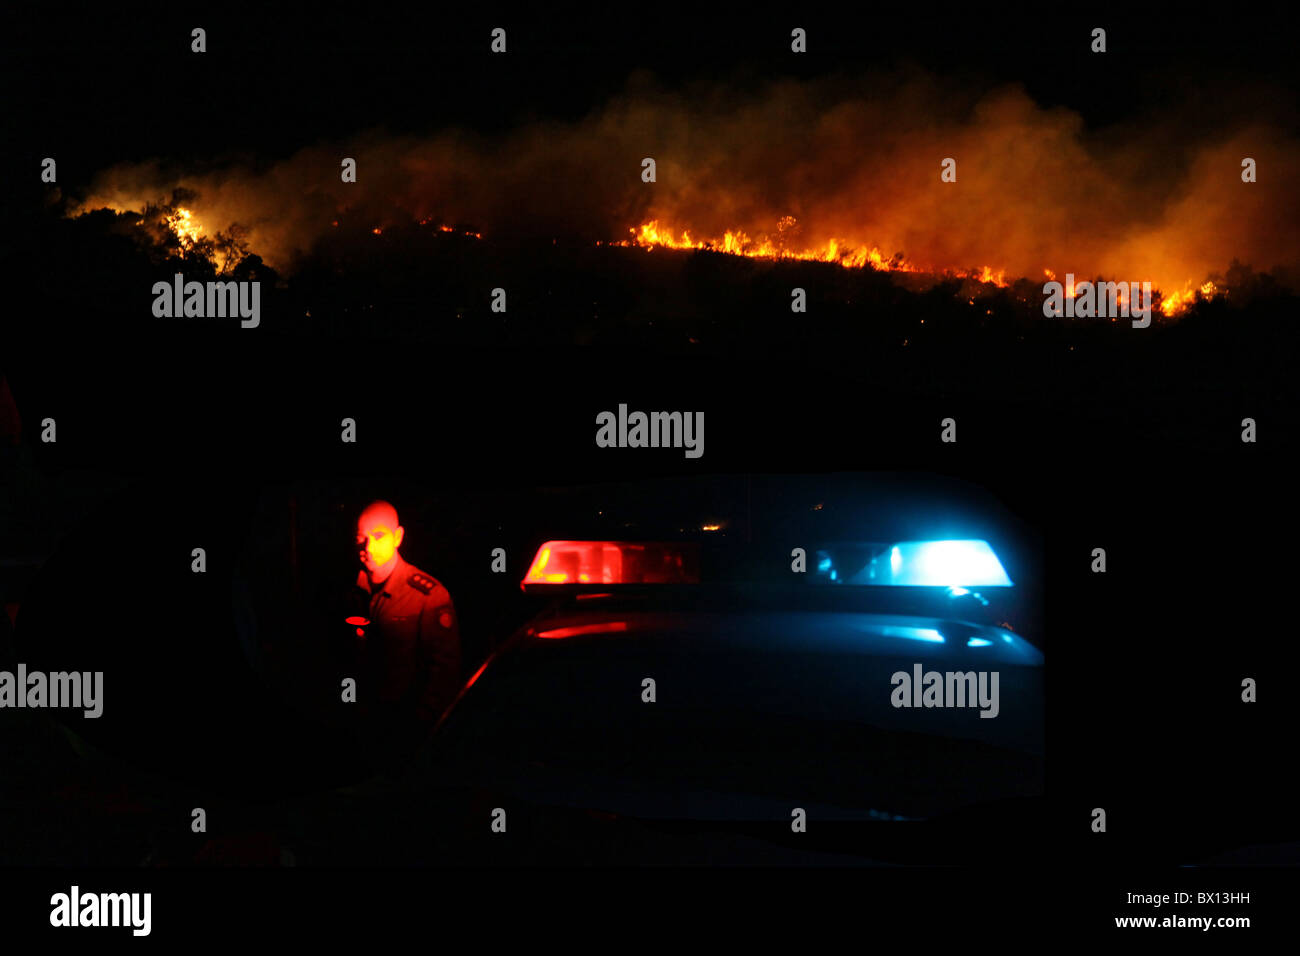 A policeman stands near massive forest fire on Mount Carmel in northern Israel. The fire consumed much of the Mediterranean forest covering the region and claimed 44 lives, making it the deadliest in Israeli history. Stock Photo